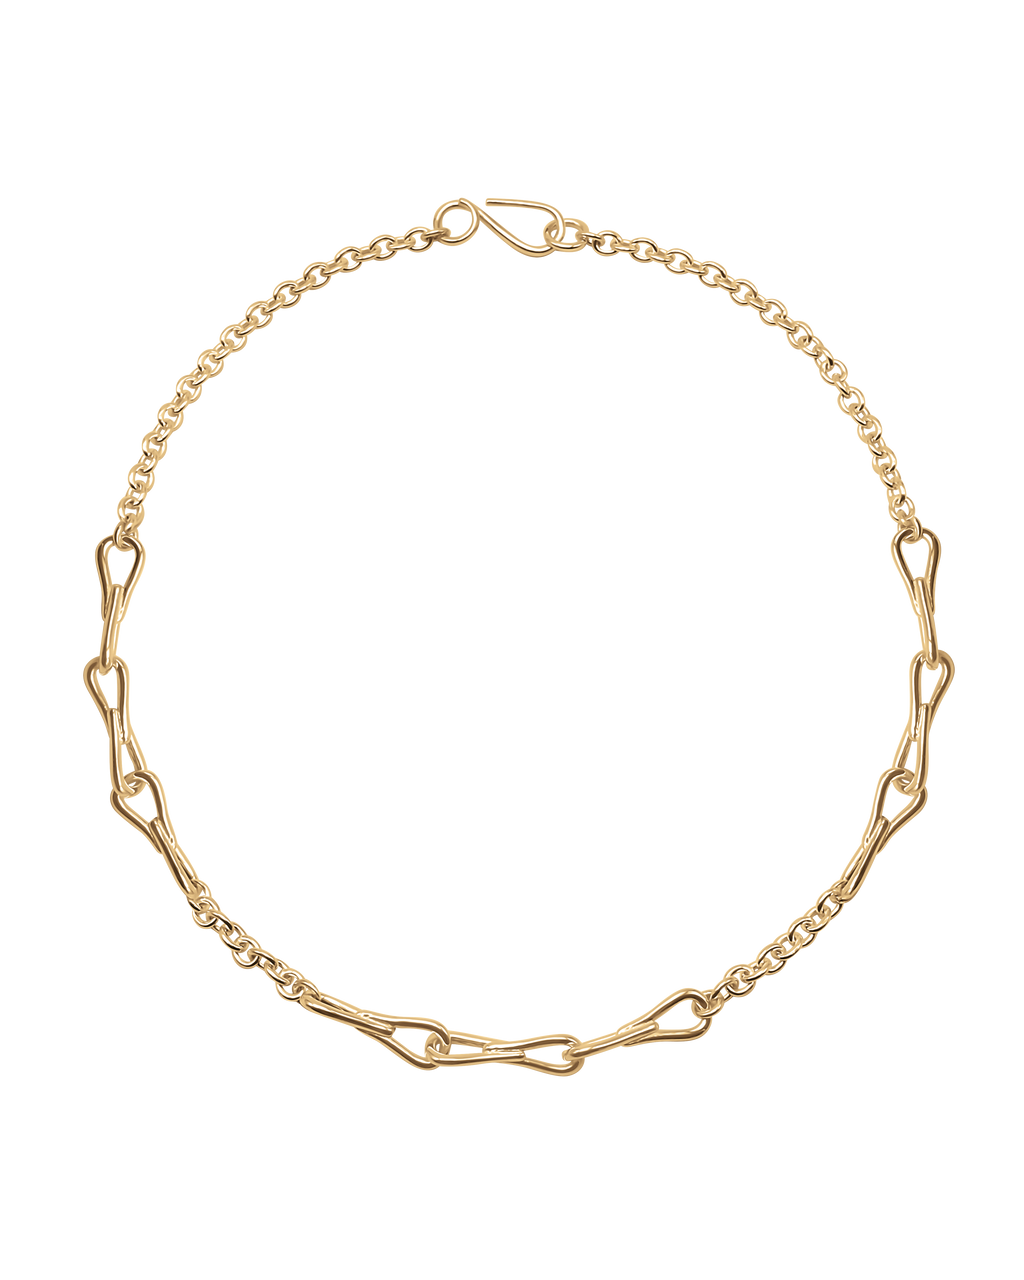 David Yurman 2.5mm Wheat Chain Necklace in 18k Yellow Gold, 22 inches | Lee  Michaels Fine Jewelry store